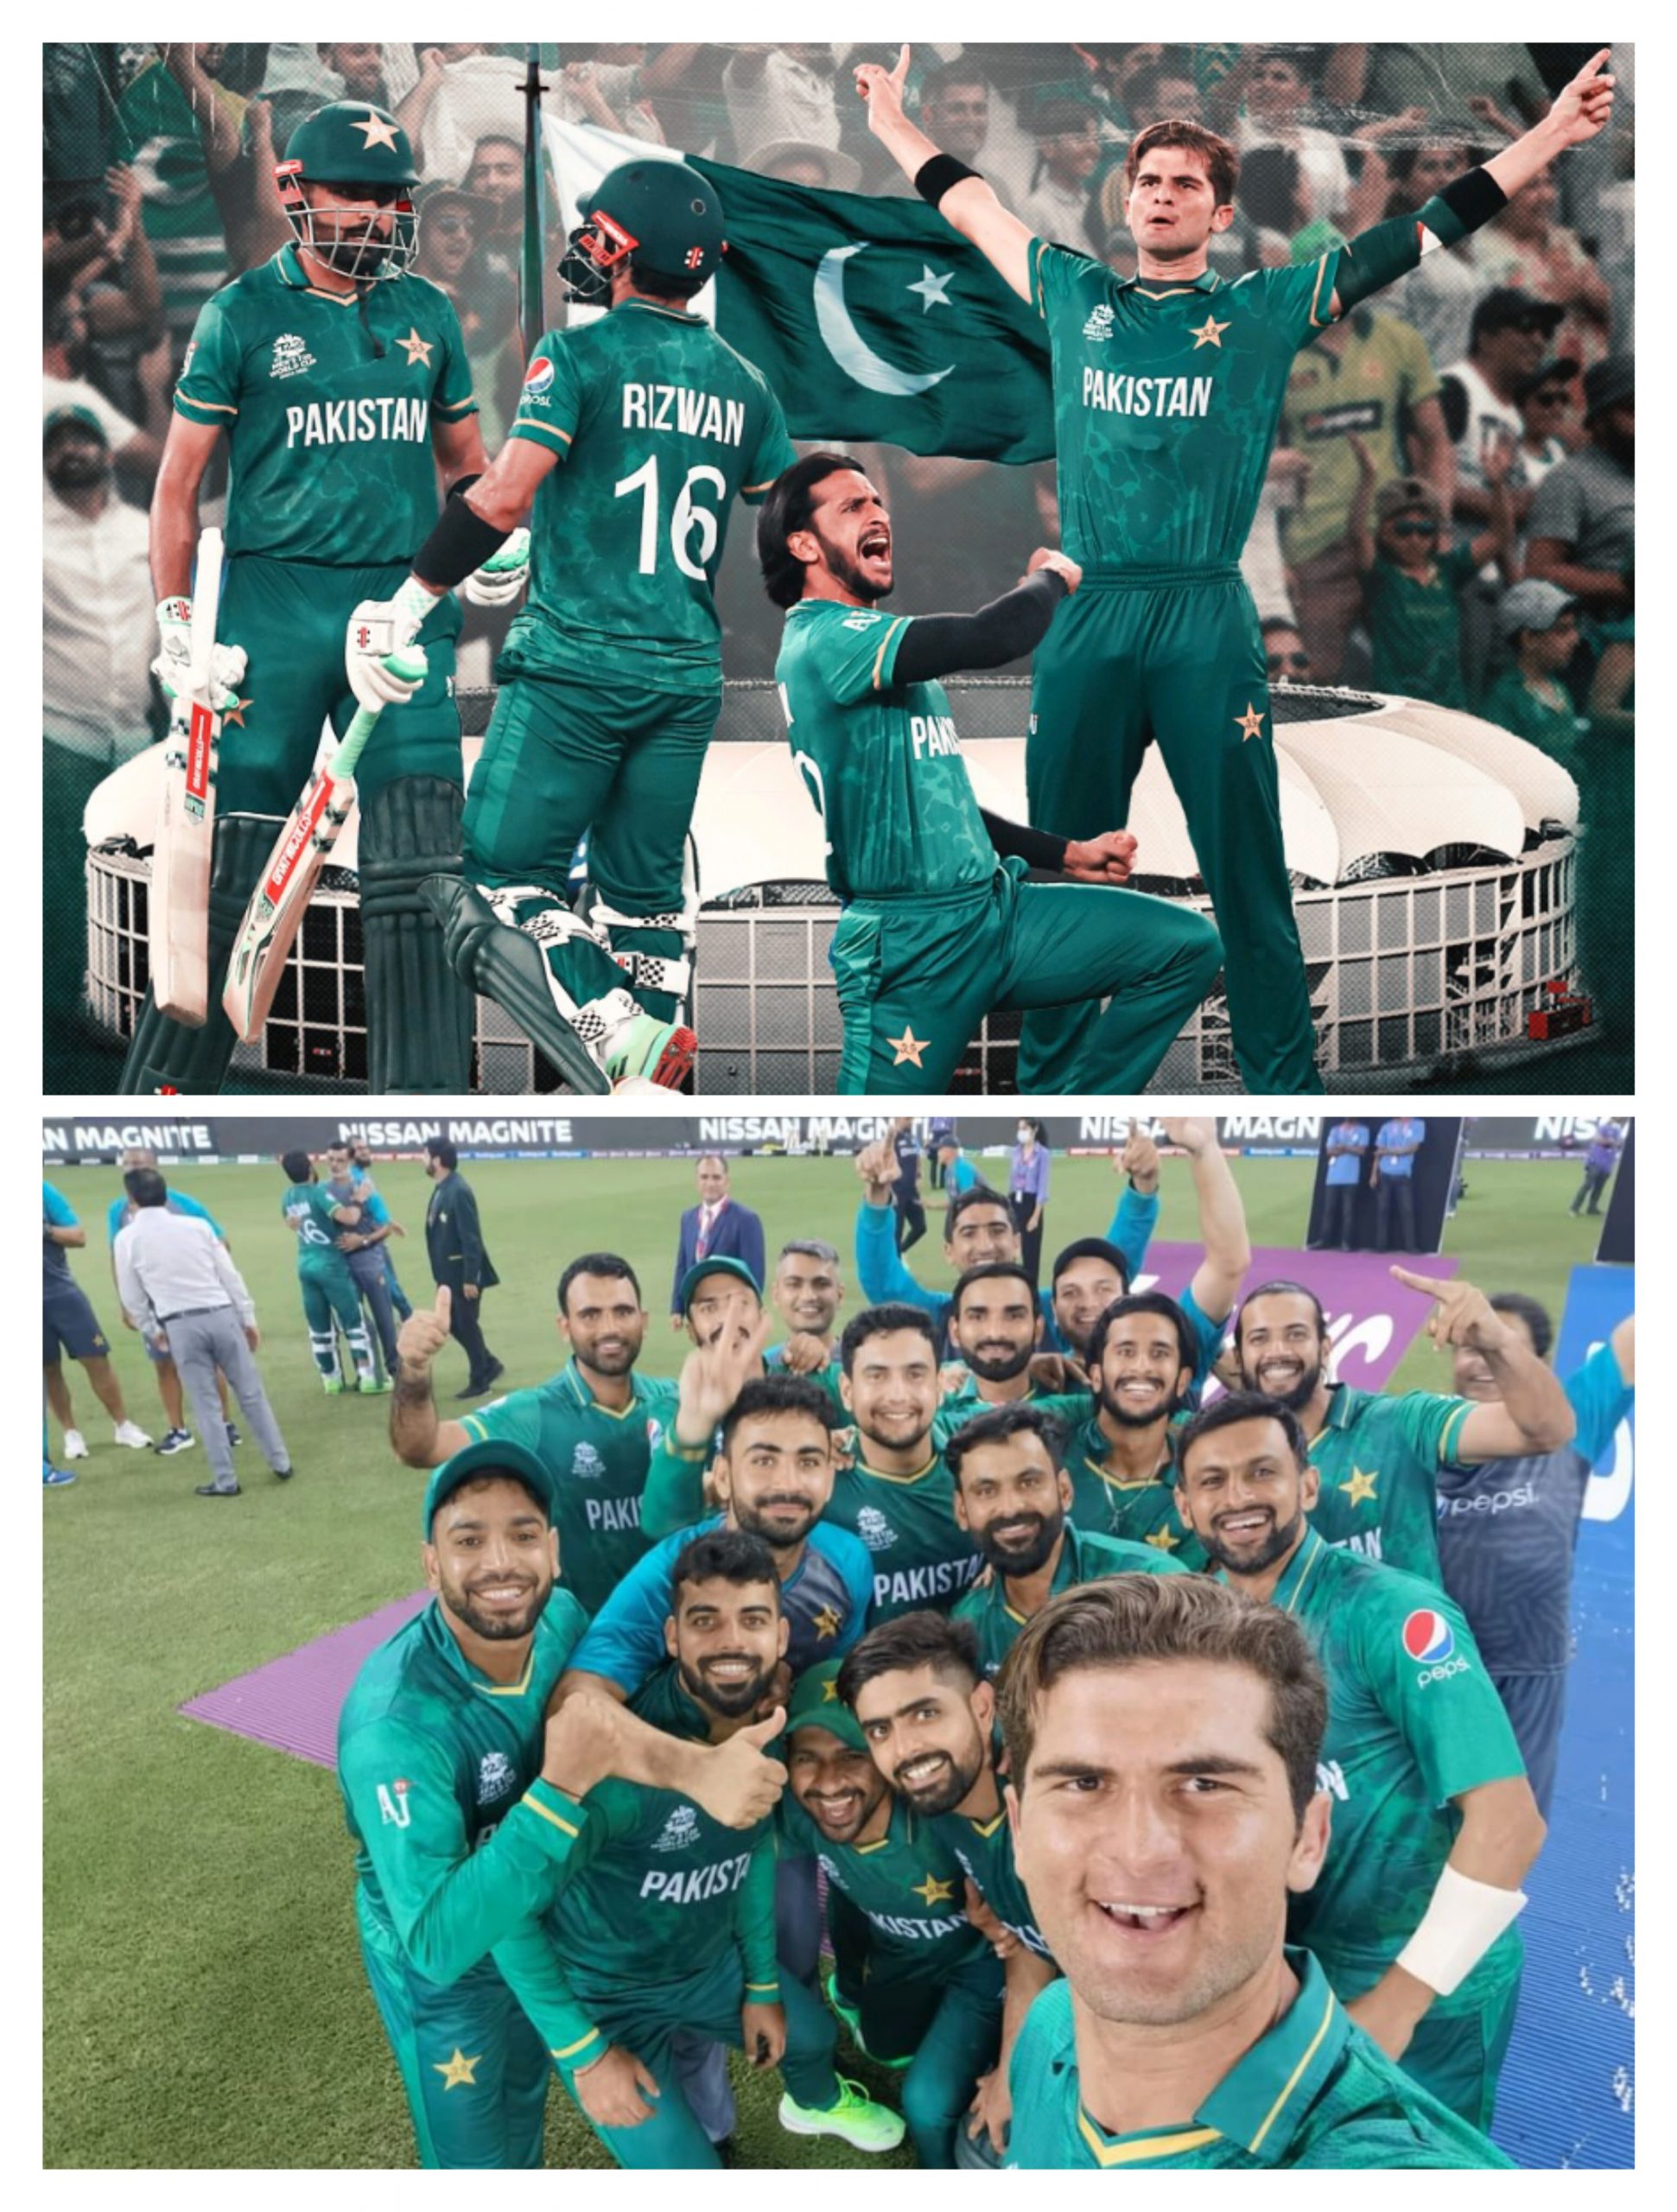 Abu Dhabi Pakistan has made a great start to the T20 World Cup by defeating India.